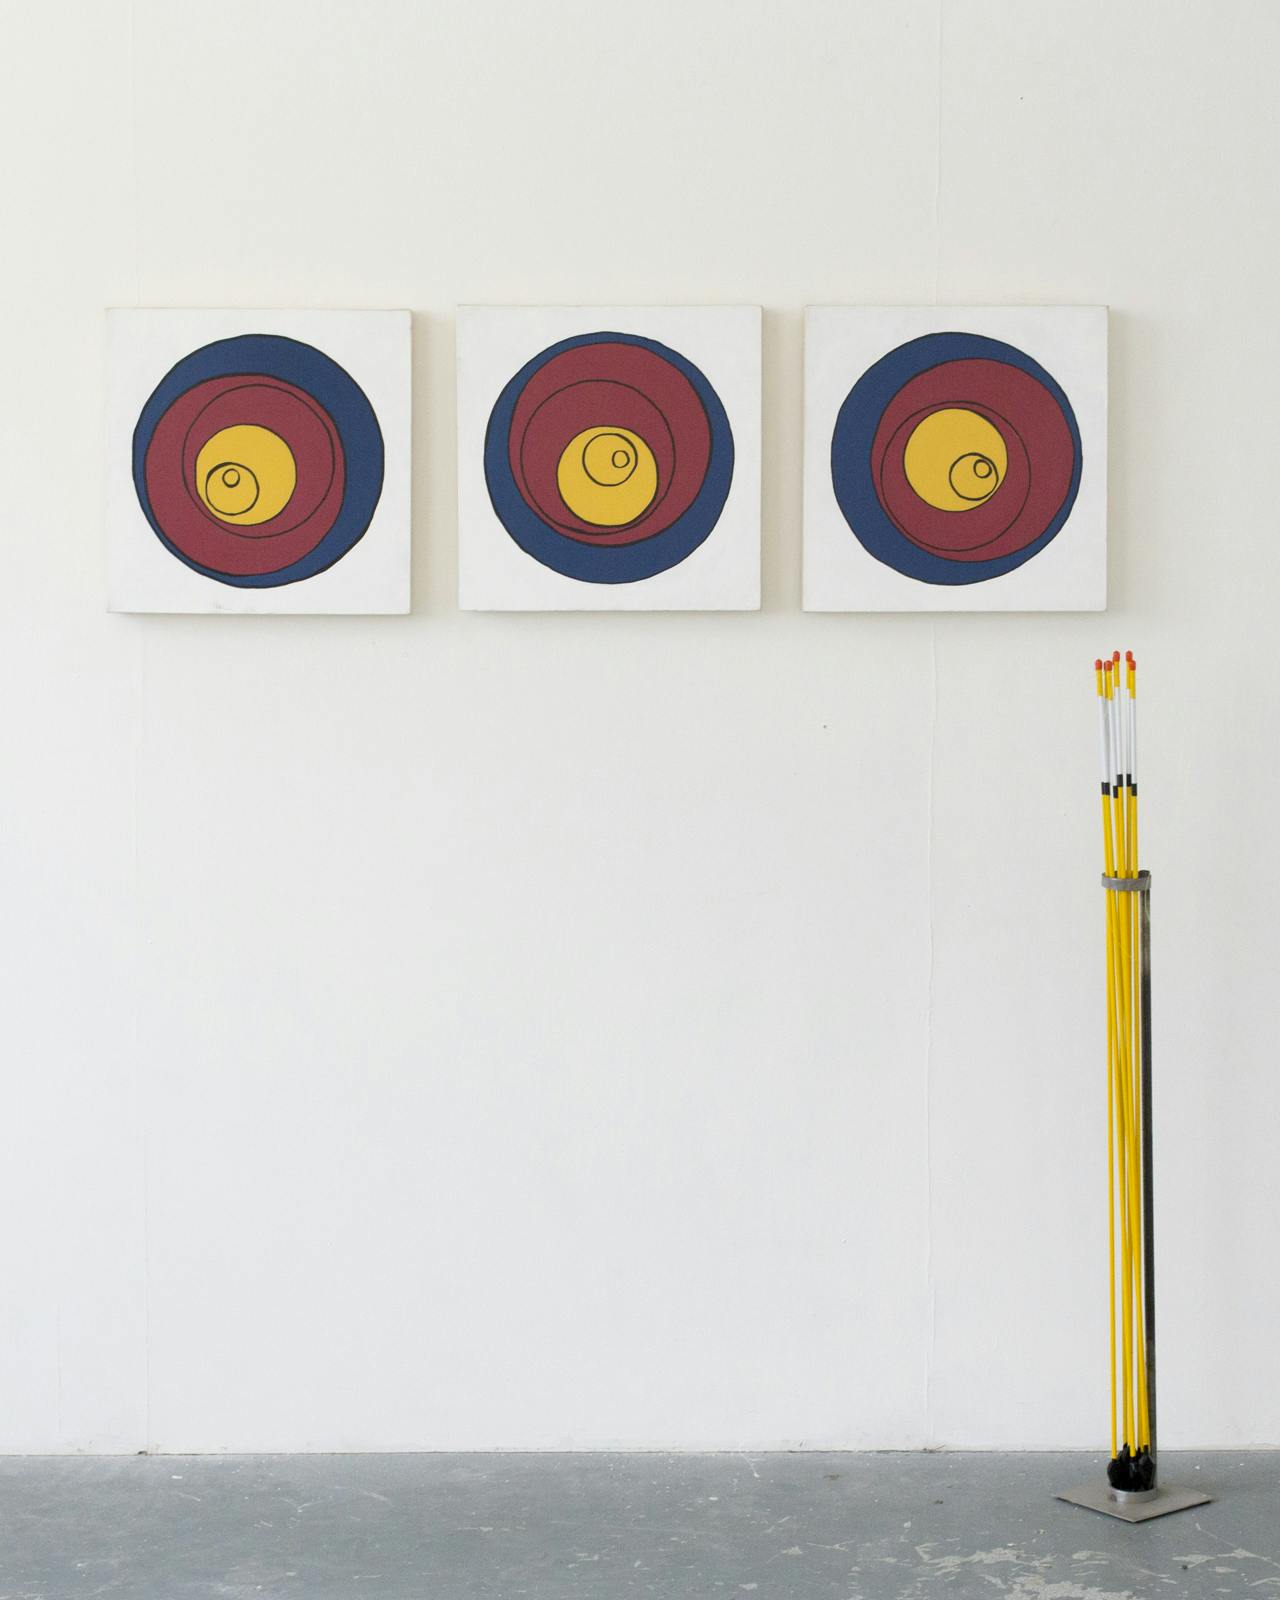 Untitled(targets), from Jacob's website